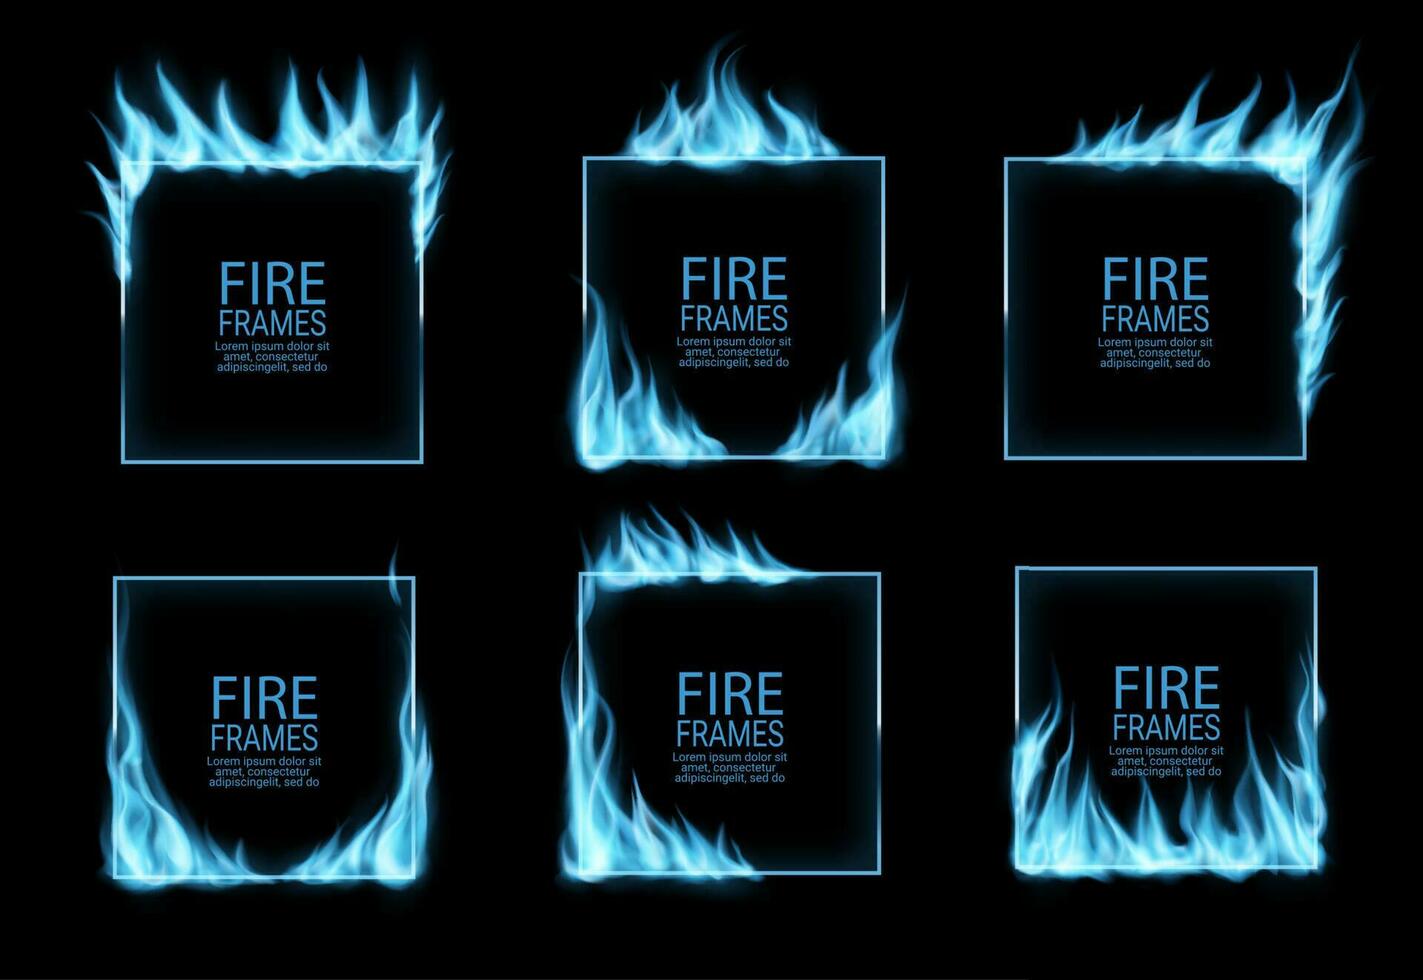 Square frames with blue gas fire flames burning vector